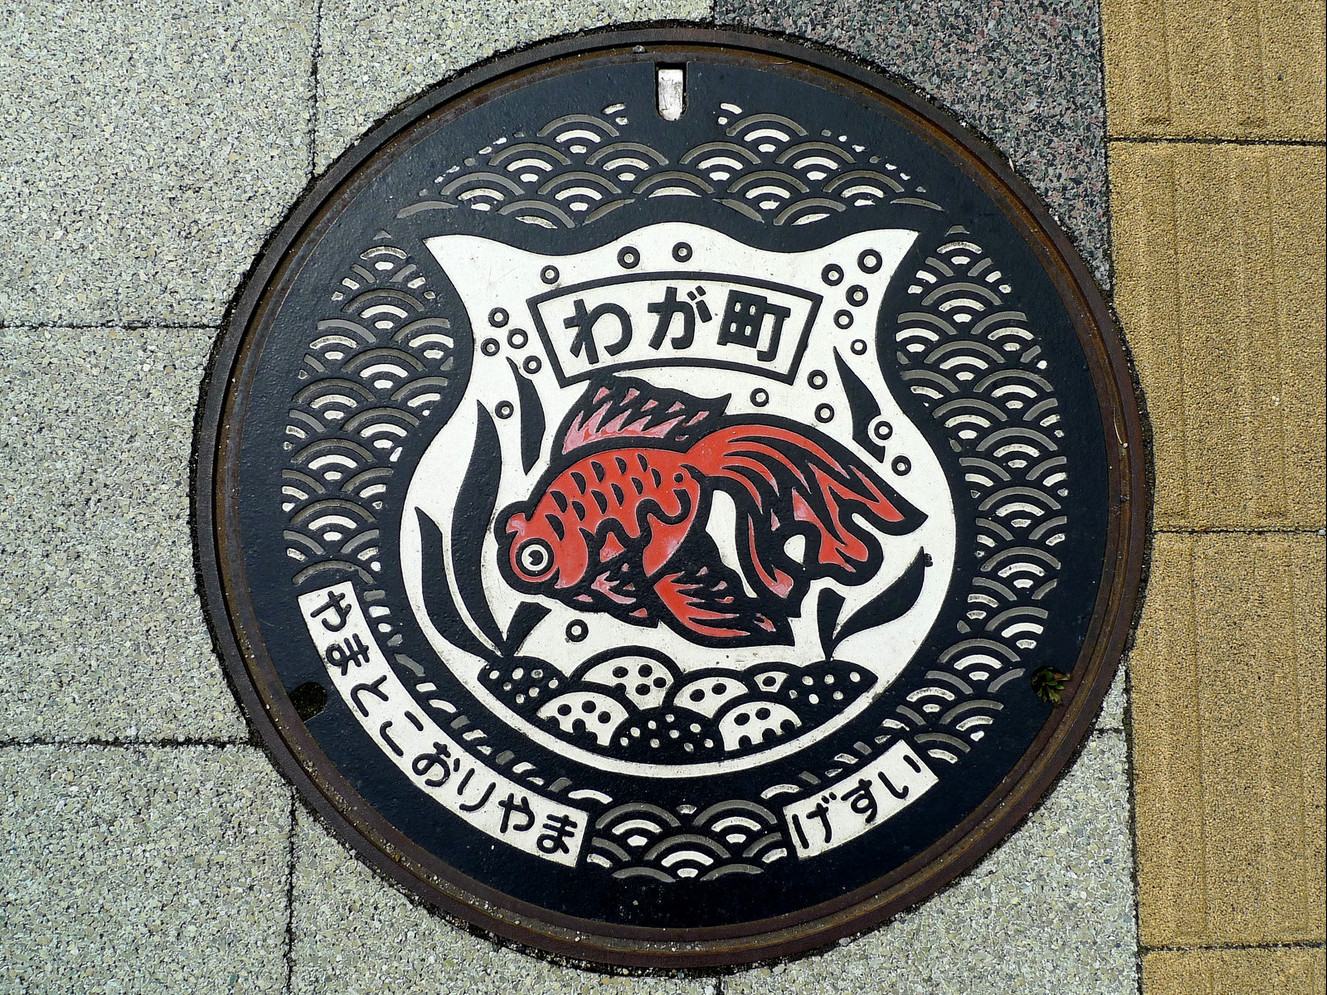 sewer covers of japan